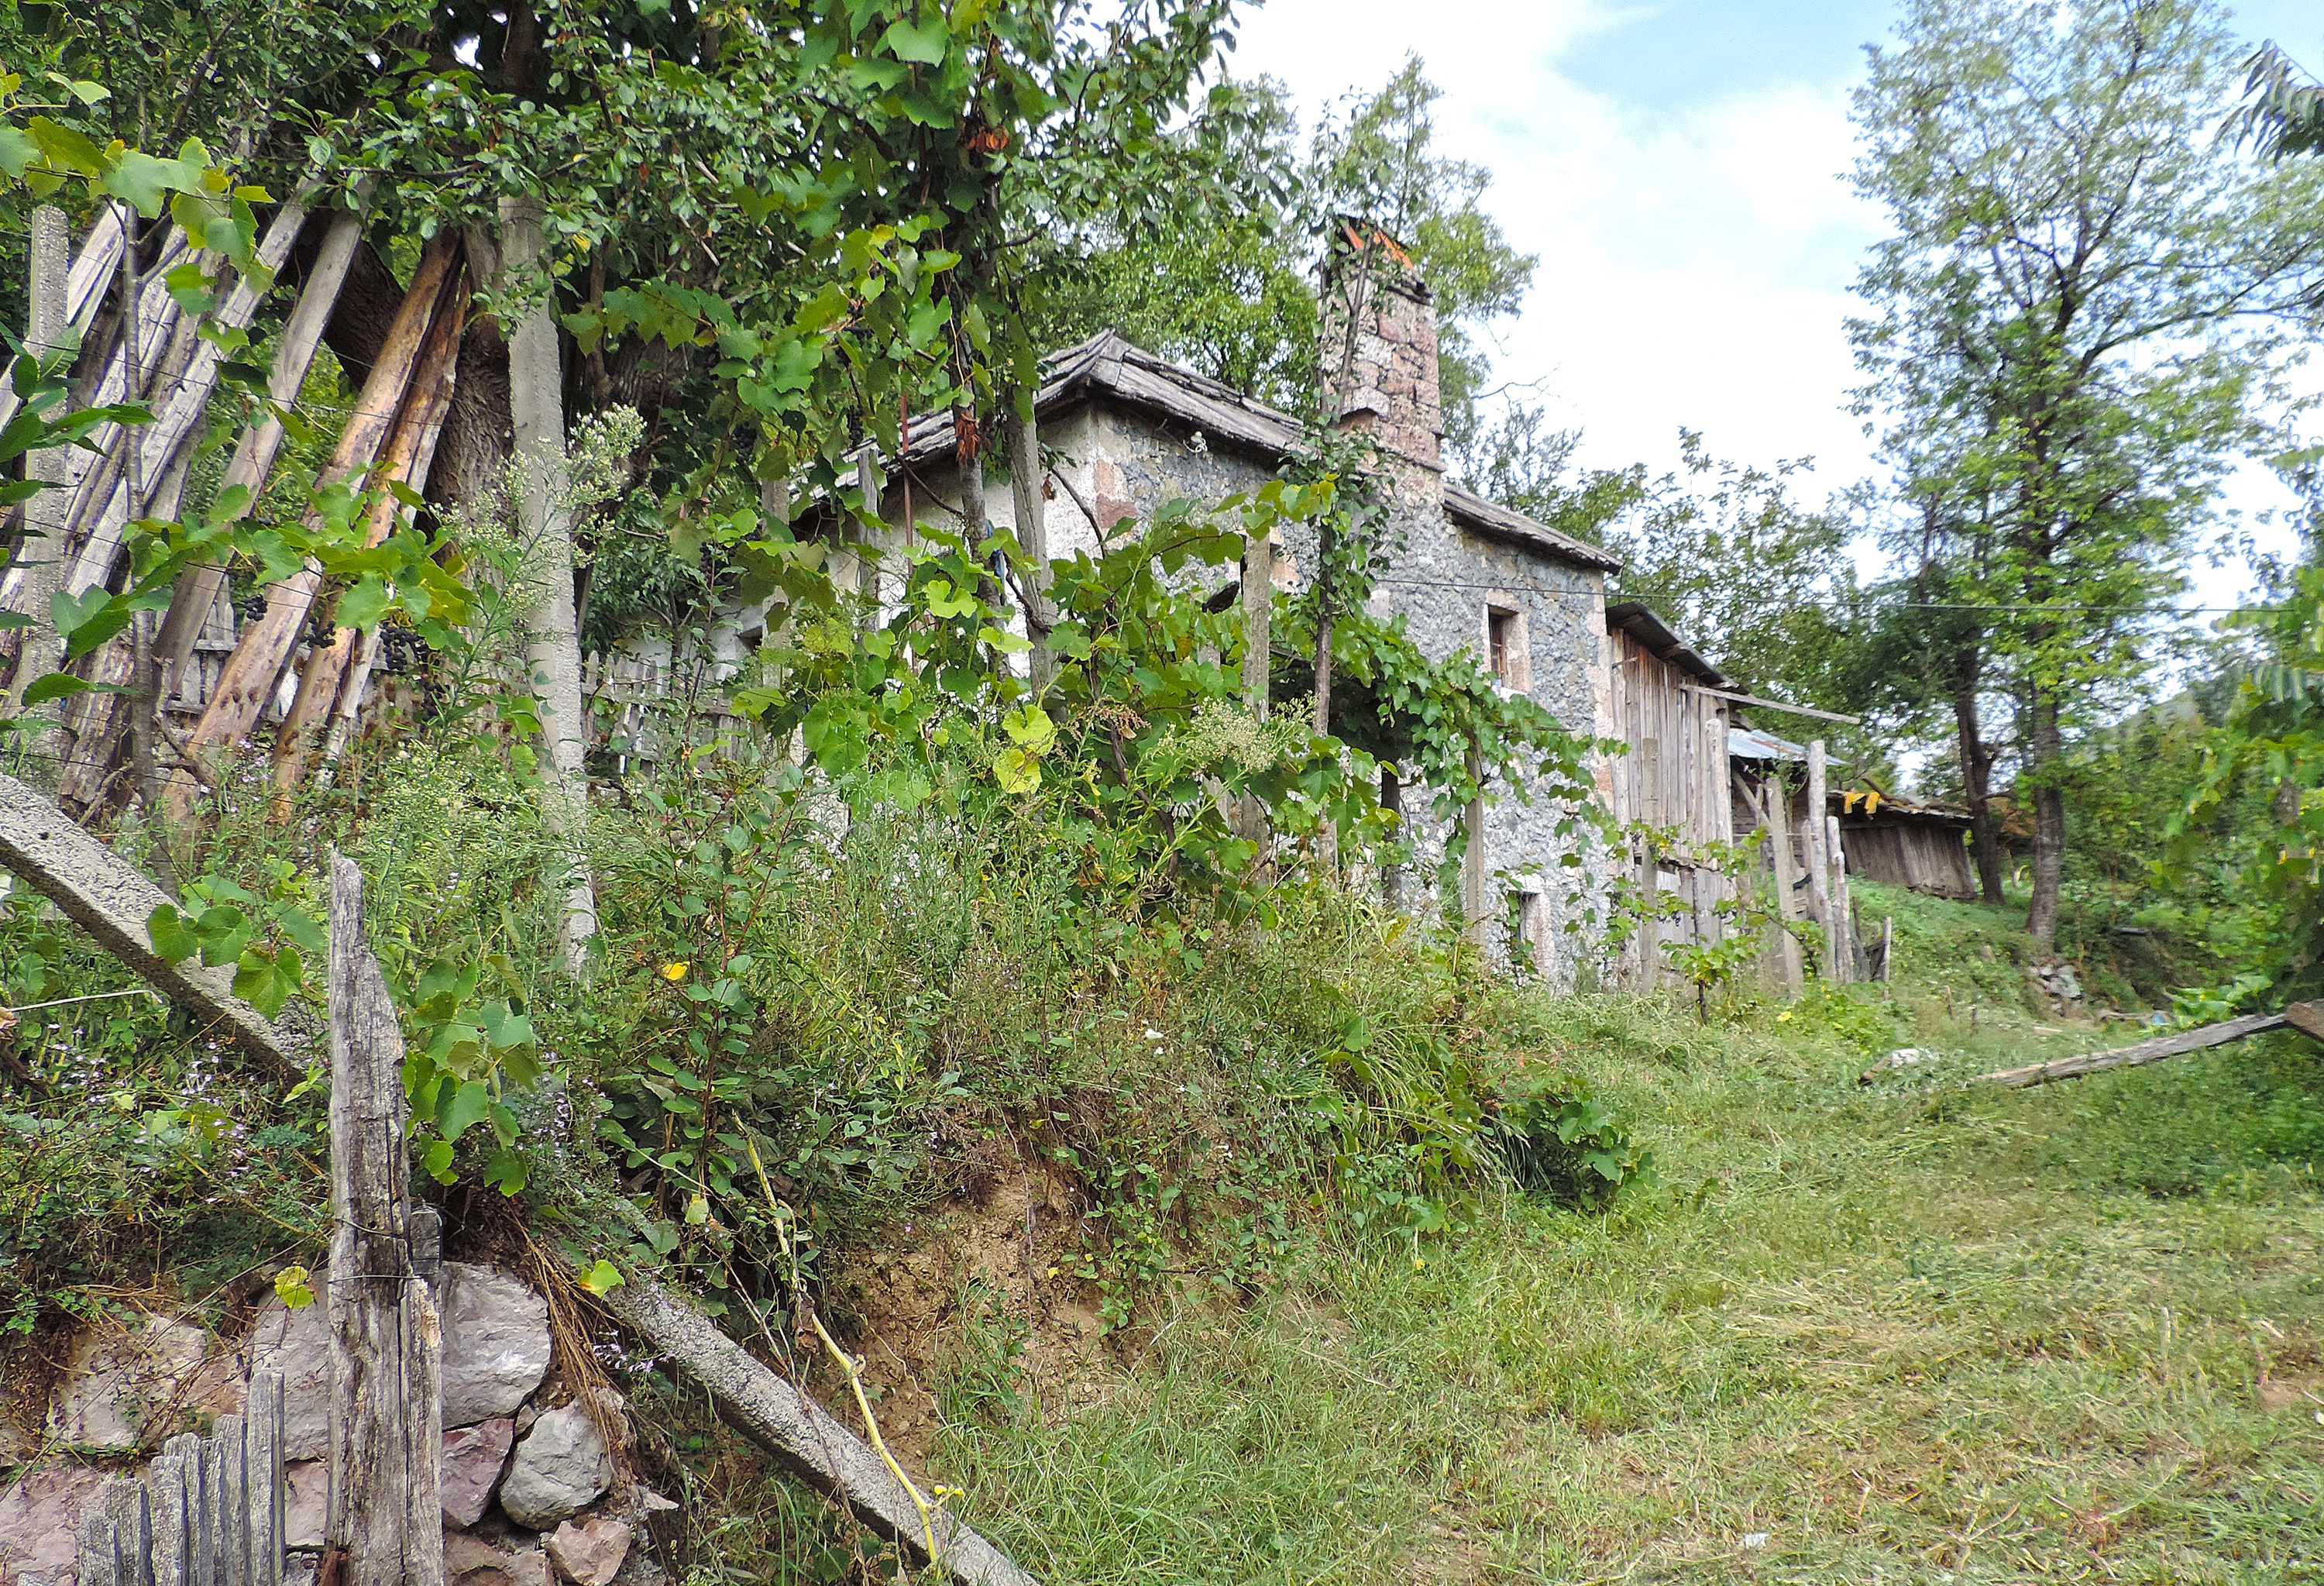 <p>This abandoned 2-story stone house is like a small kulla, square with peaked roof. A large chimney is flanked by window openings, and larger stones reinforce the openings and building corners. A wooden barn sits beyond the house.</p>